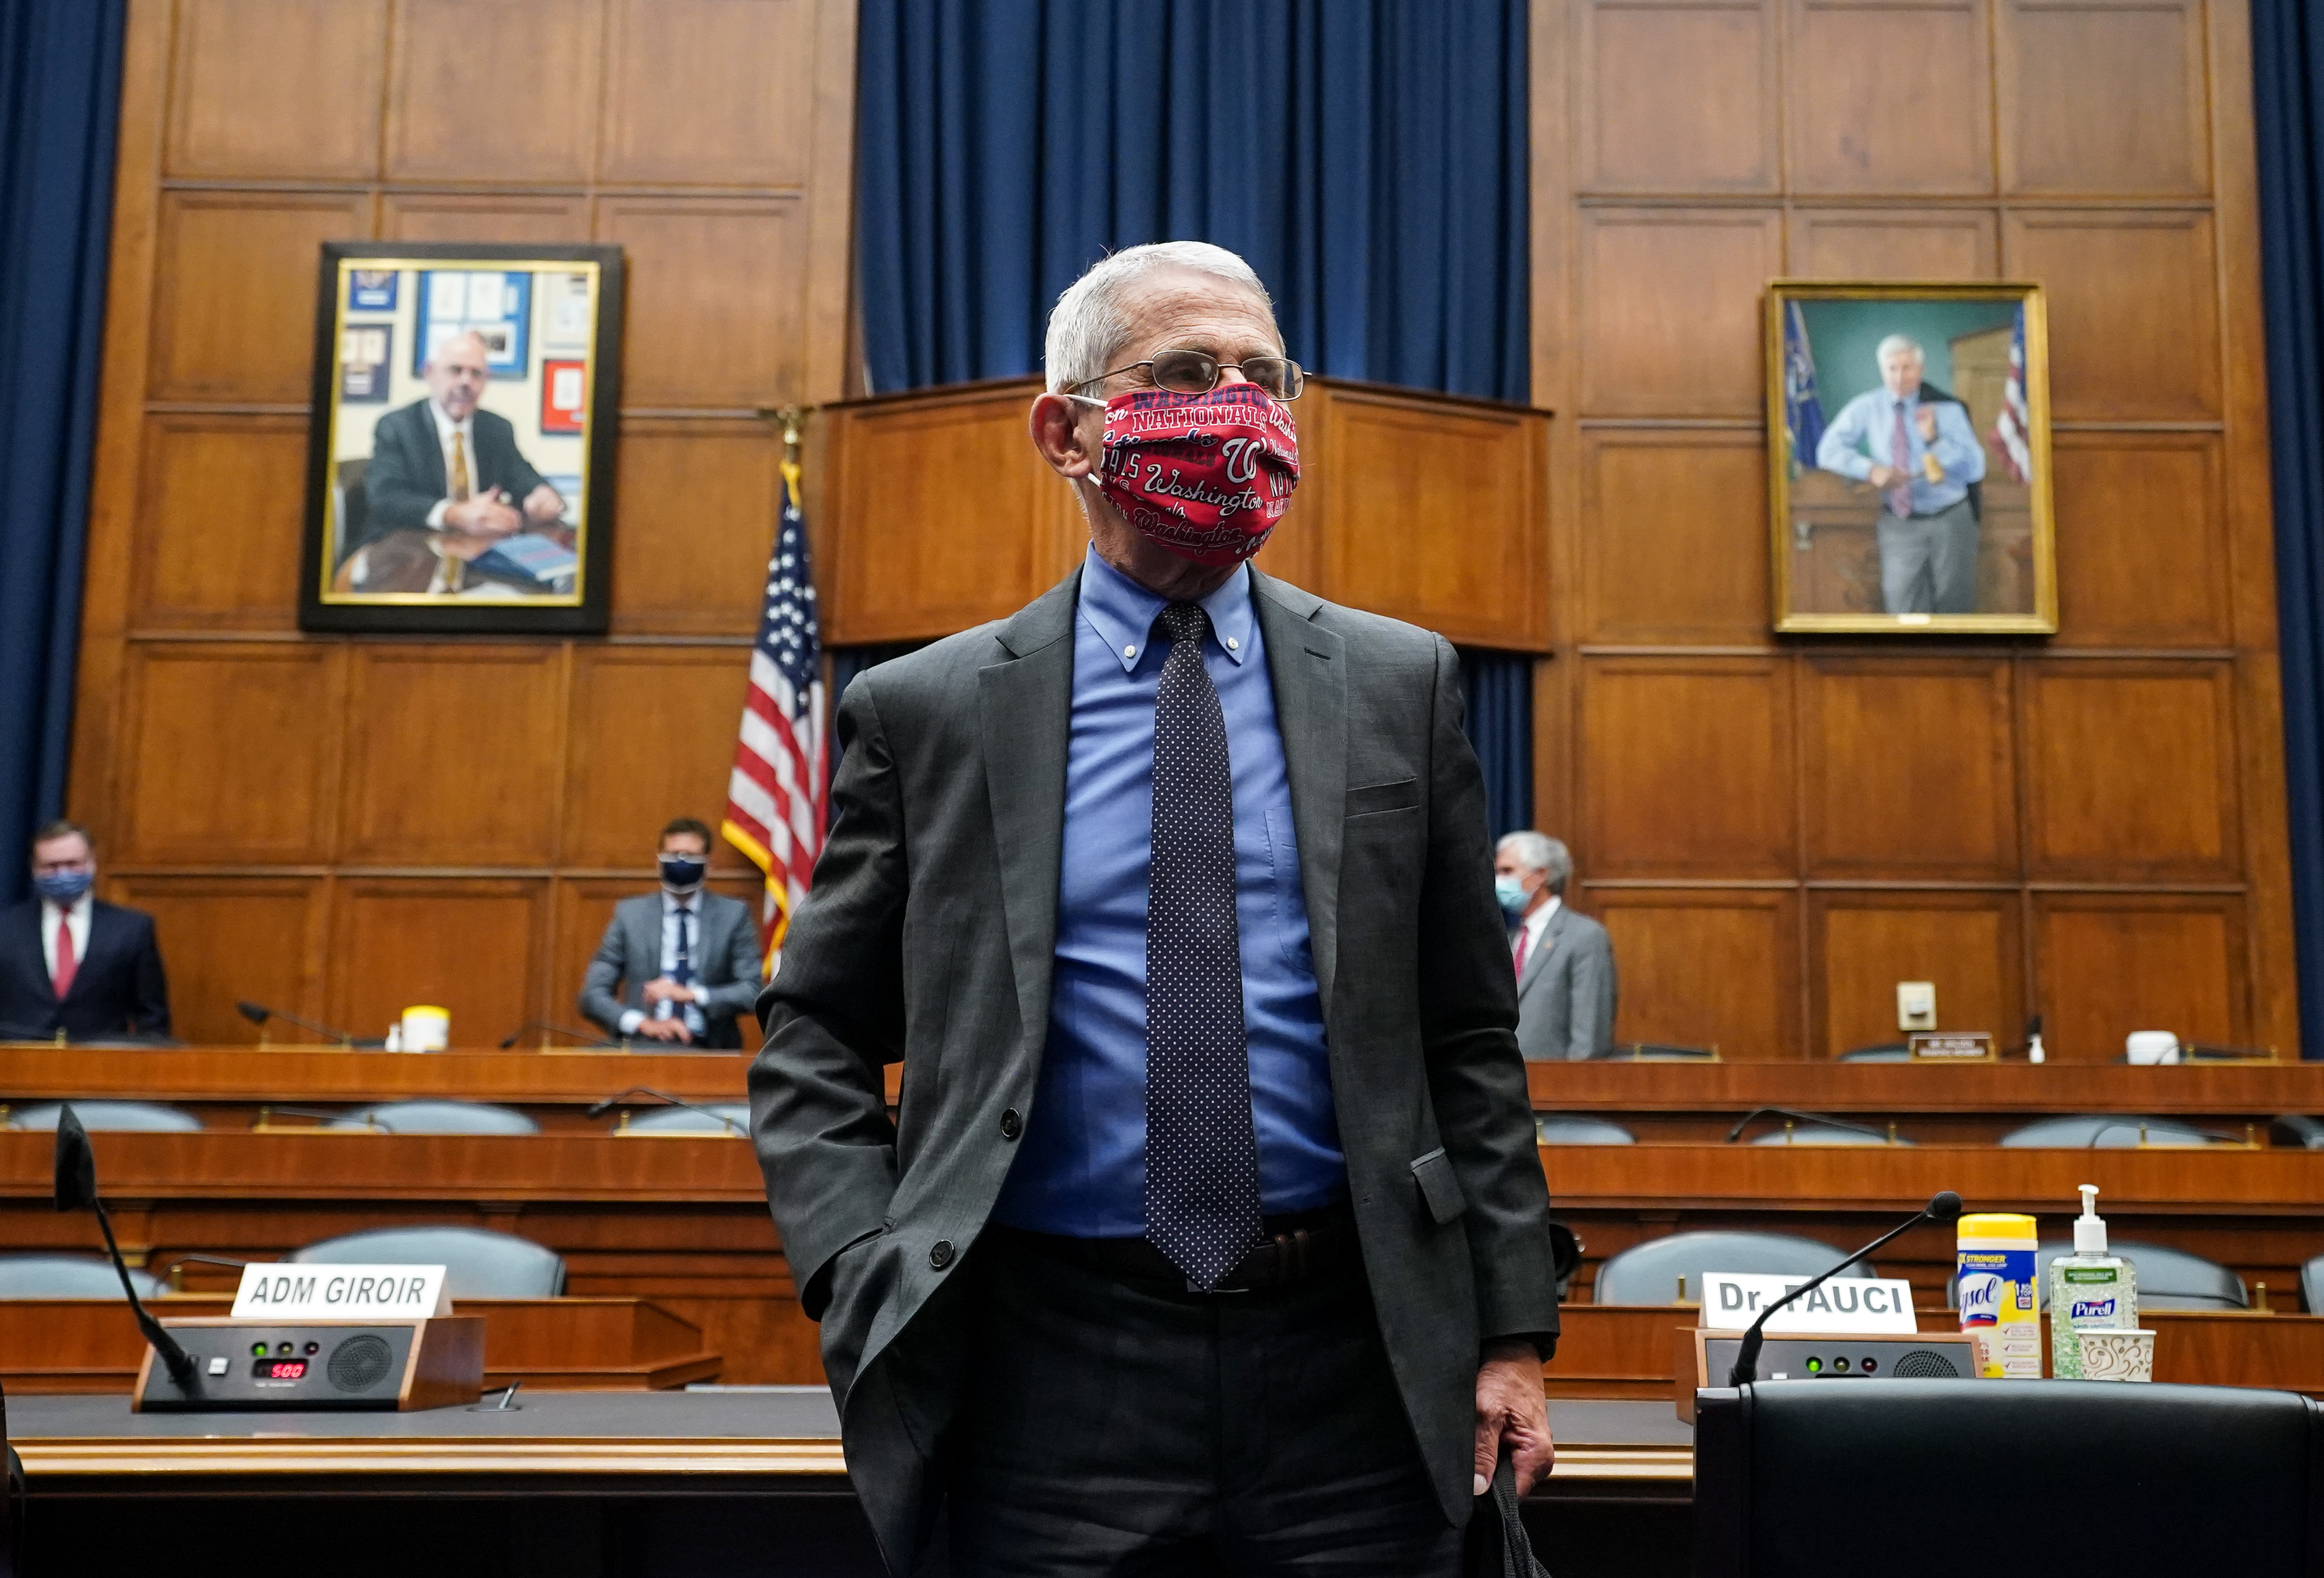 WASHINGTON, DC - JUNE 23: Dr. Anthony Fauci, director of the National Institute of Allergy and Infectious Diseases, leaves after testifying at a hearing of the U.S. House Committee on Energy and Commerce on Capitol Hill on June 23, 2020 in Washington, DC. The committee is investigating the Trump administration's response to the COVID-19 pandemic. (Photo by Kevin Dietsch-Pool/Getty Images)